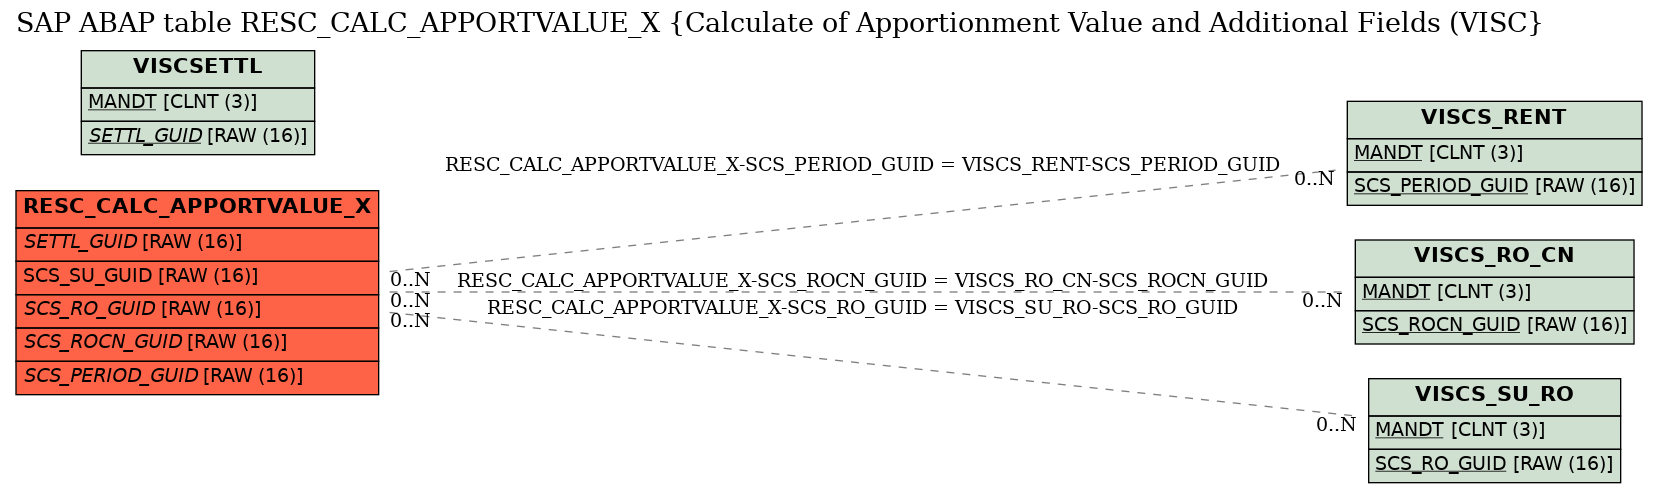 E-R Diagram for table RESC_CALC_APPORTVALUE_X (Calculate of Apportionment Value and Additional Fields (VISC)